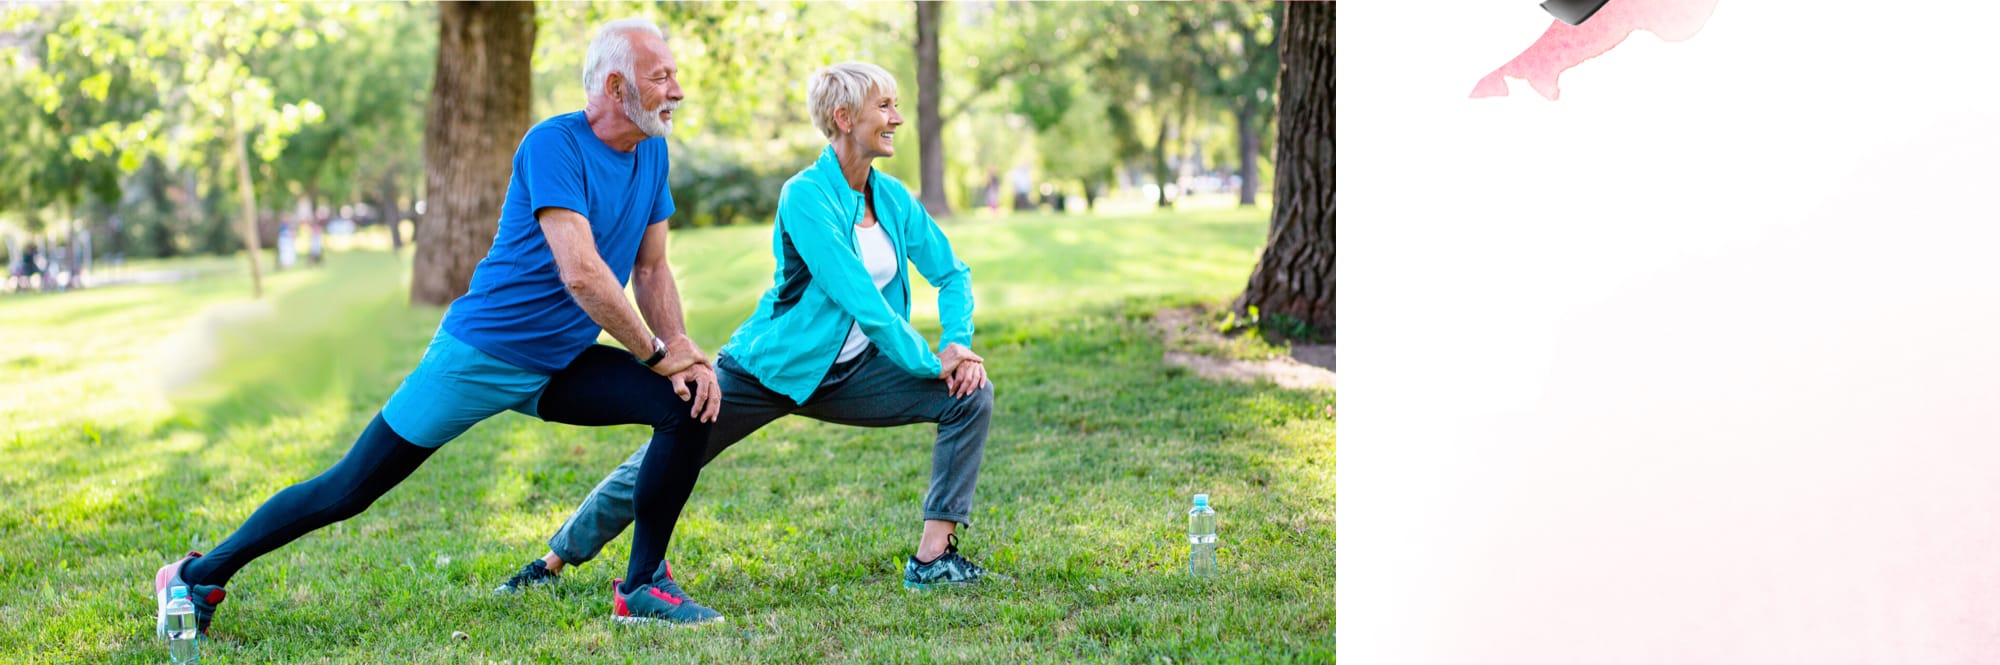 Elderly couple stays healthy and active by practices yoga together outside in a park